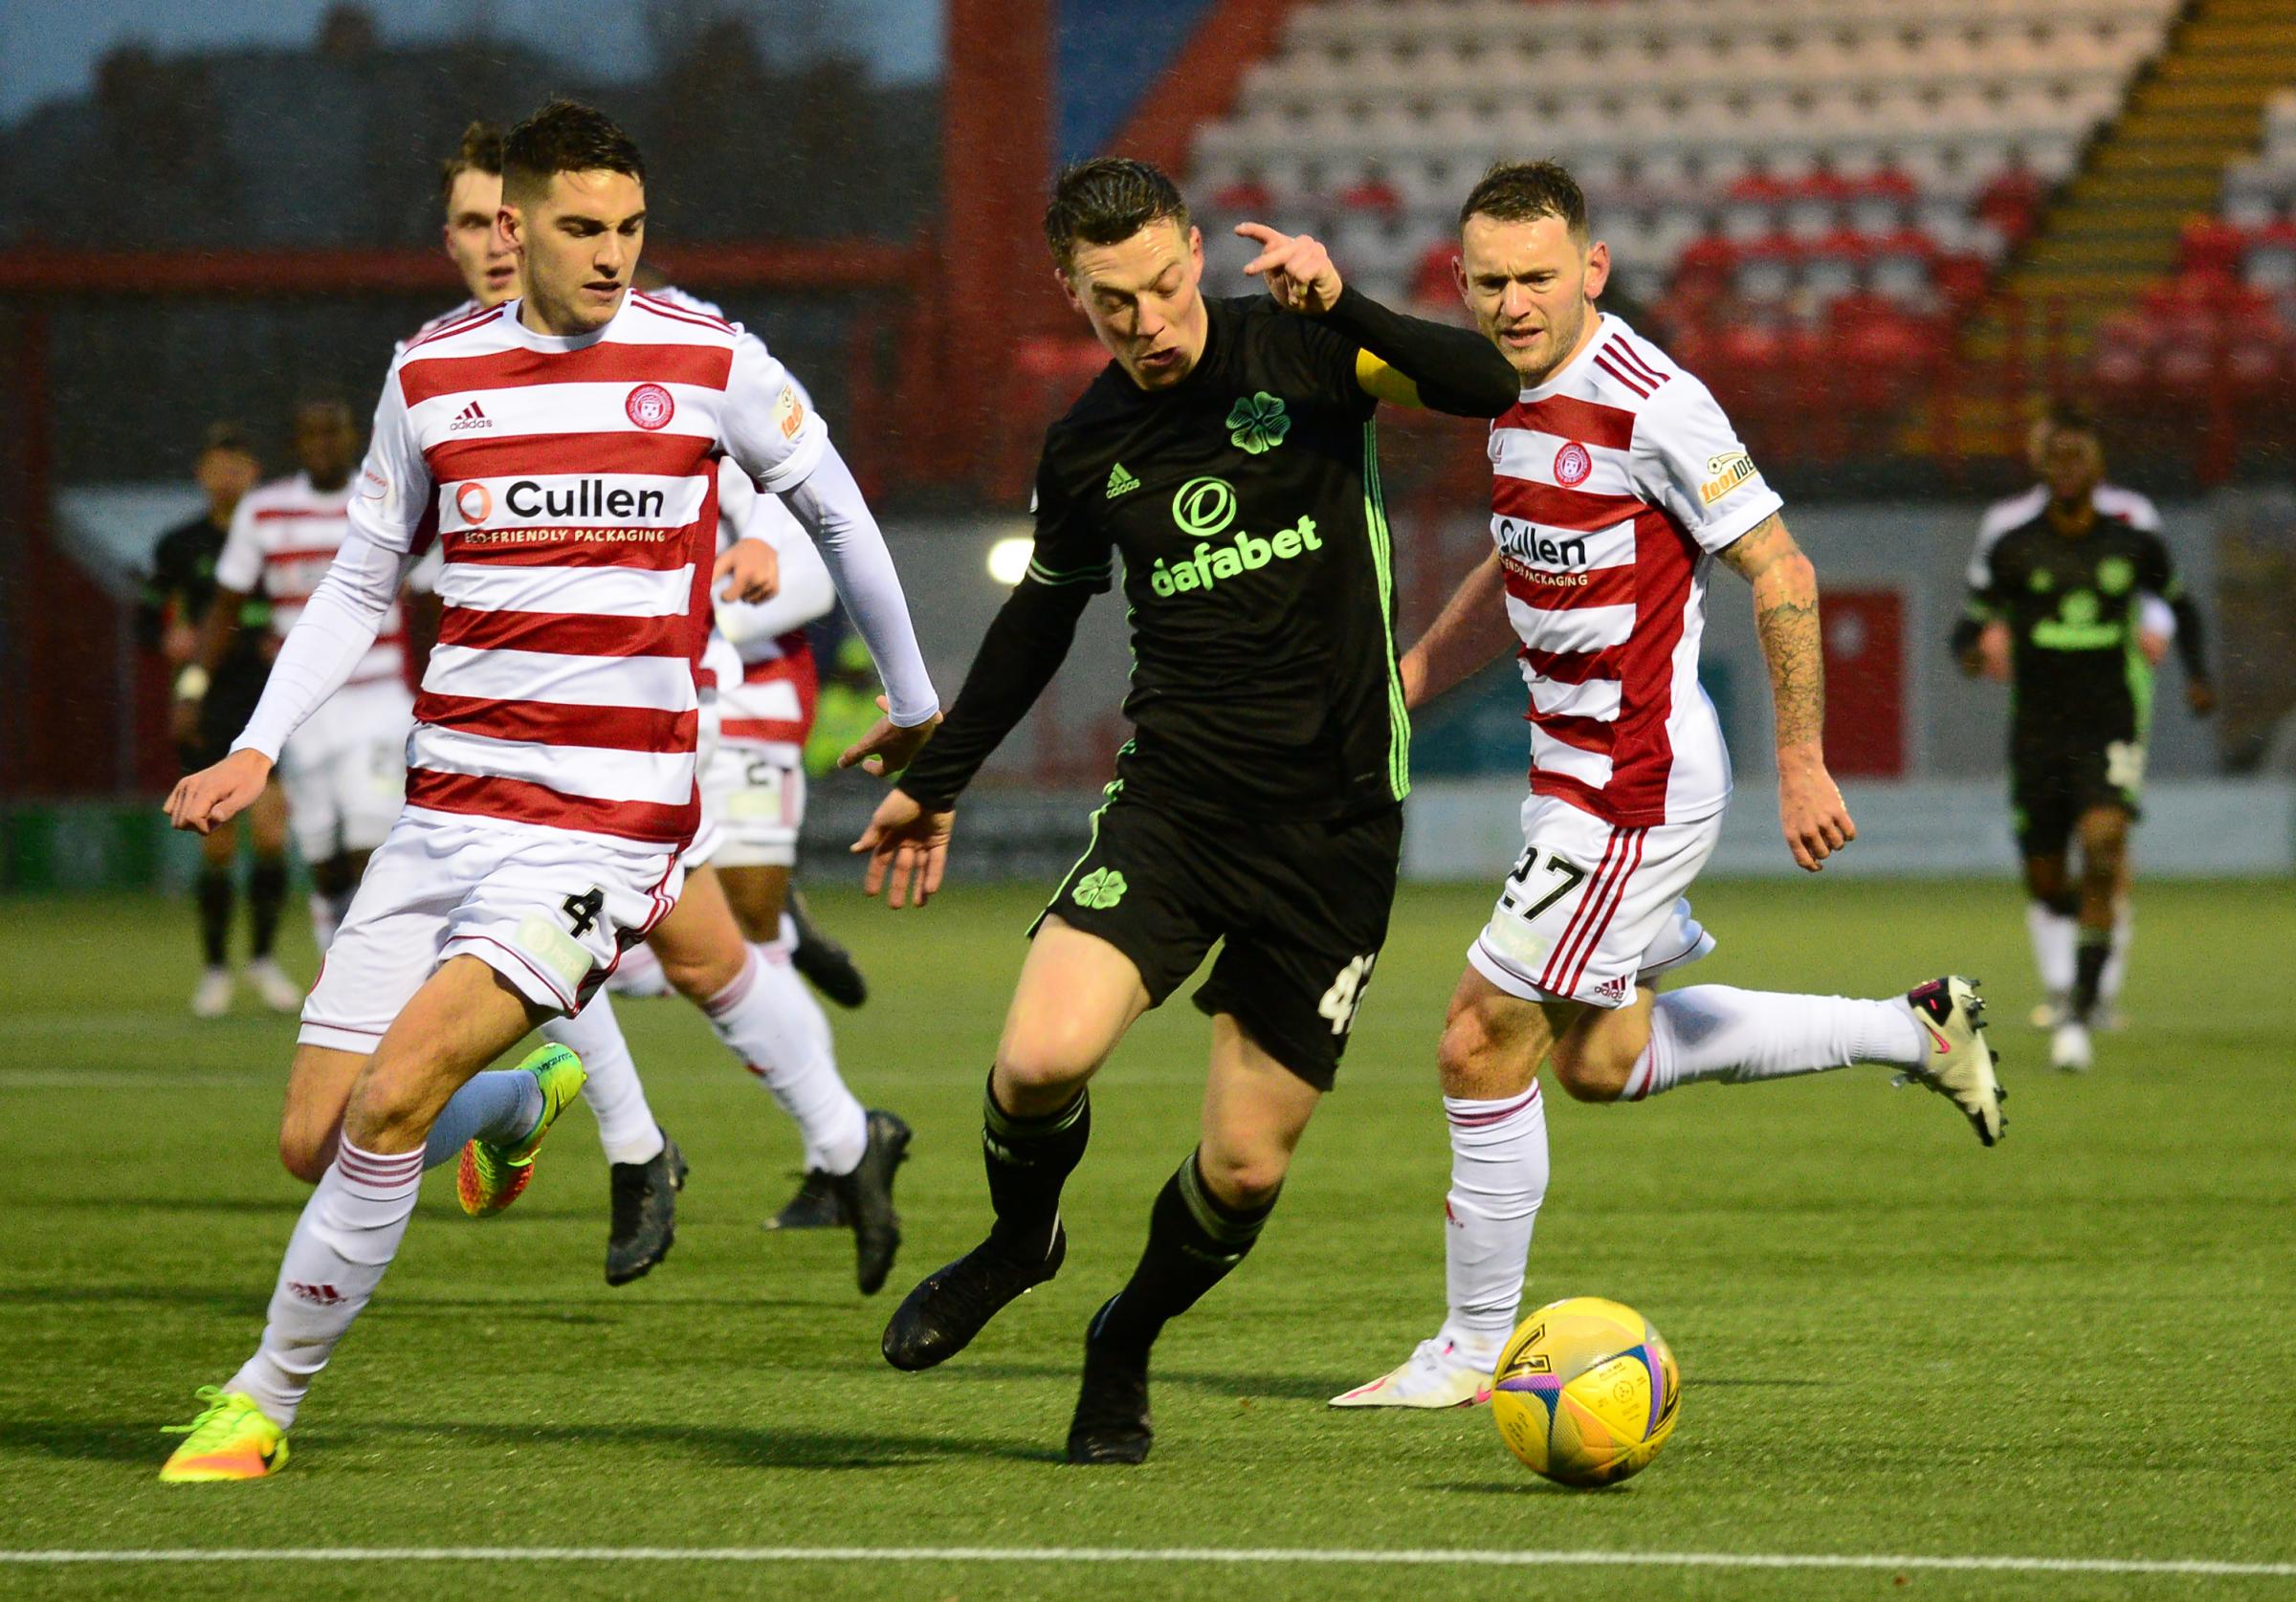 Lee Hodson urges Hamilton to use being written off to fire them up in Premiership survival battle